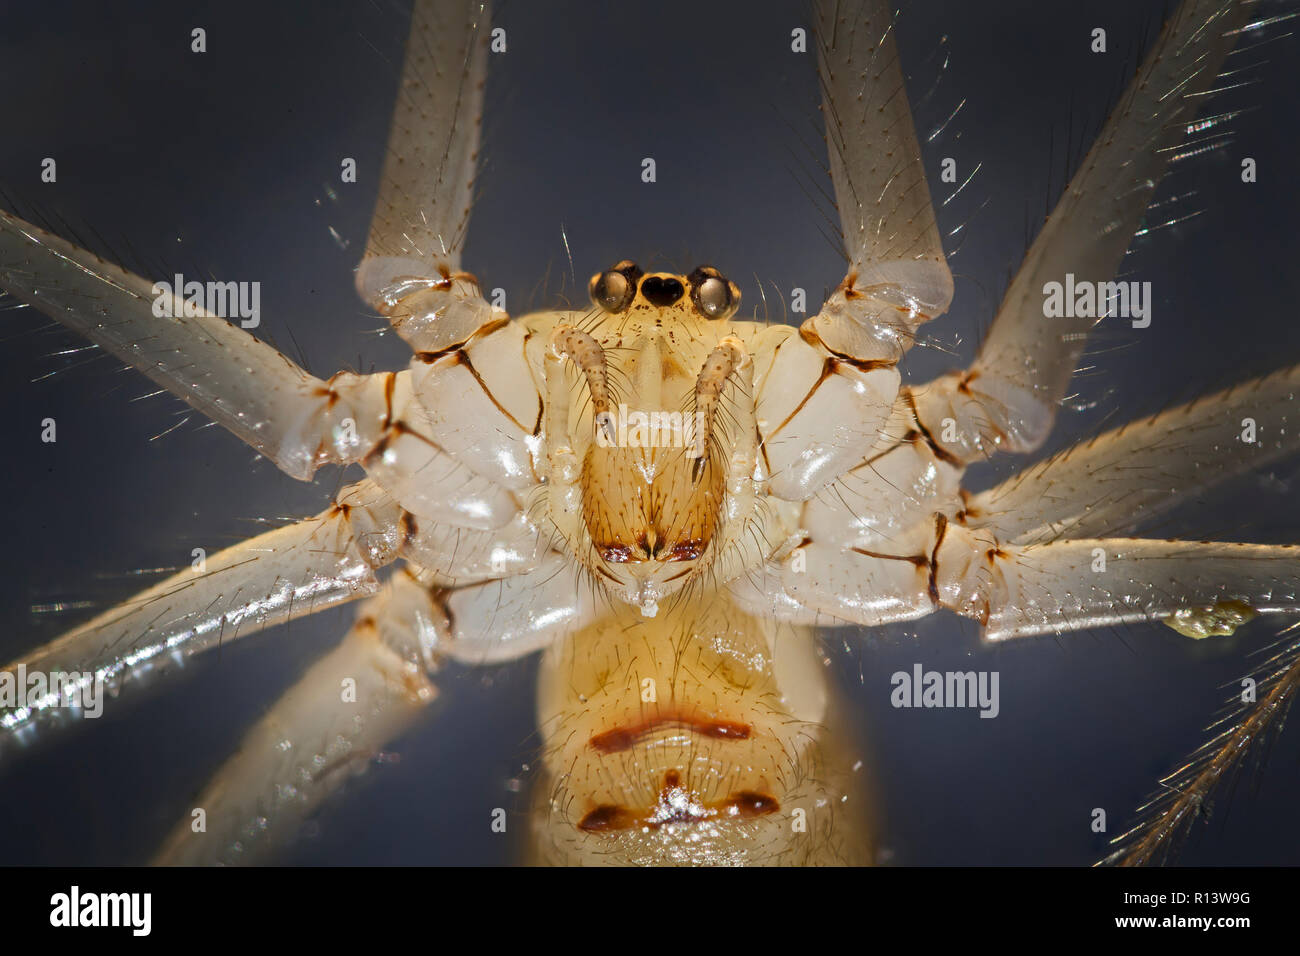 Pholcus phalangioides spider, highly magnified portrait showing palps, mandibles, eyes Stock Photo